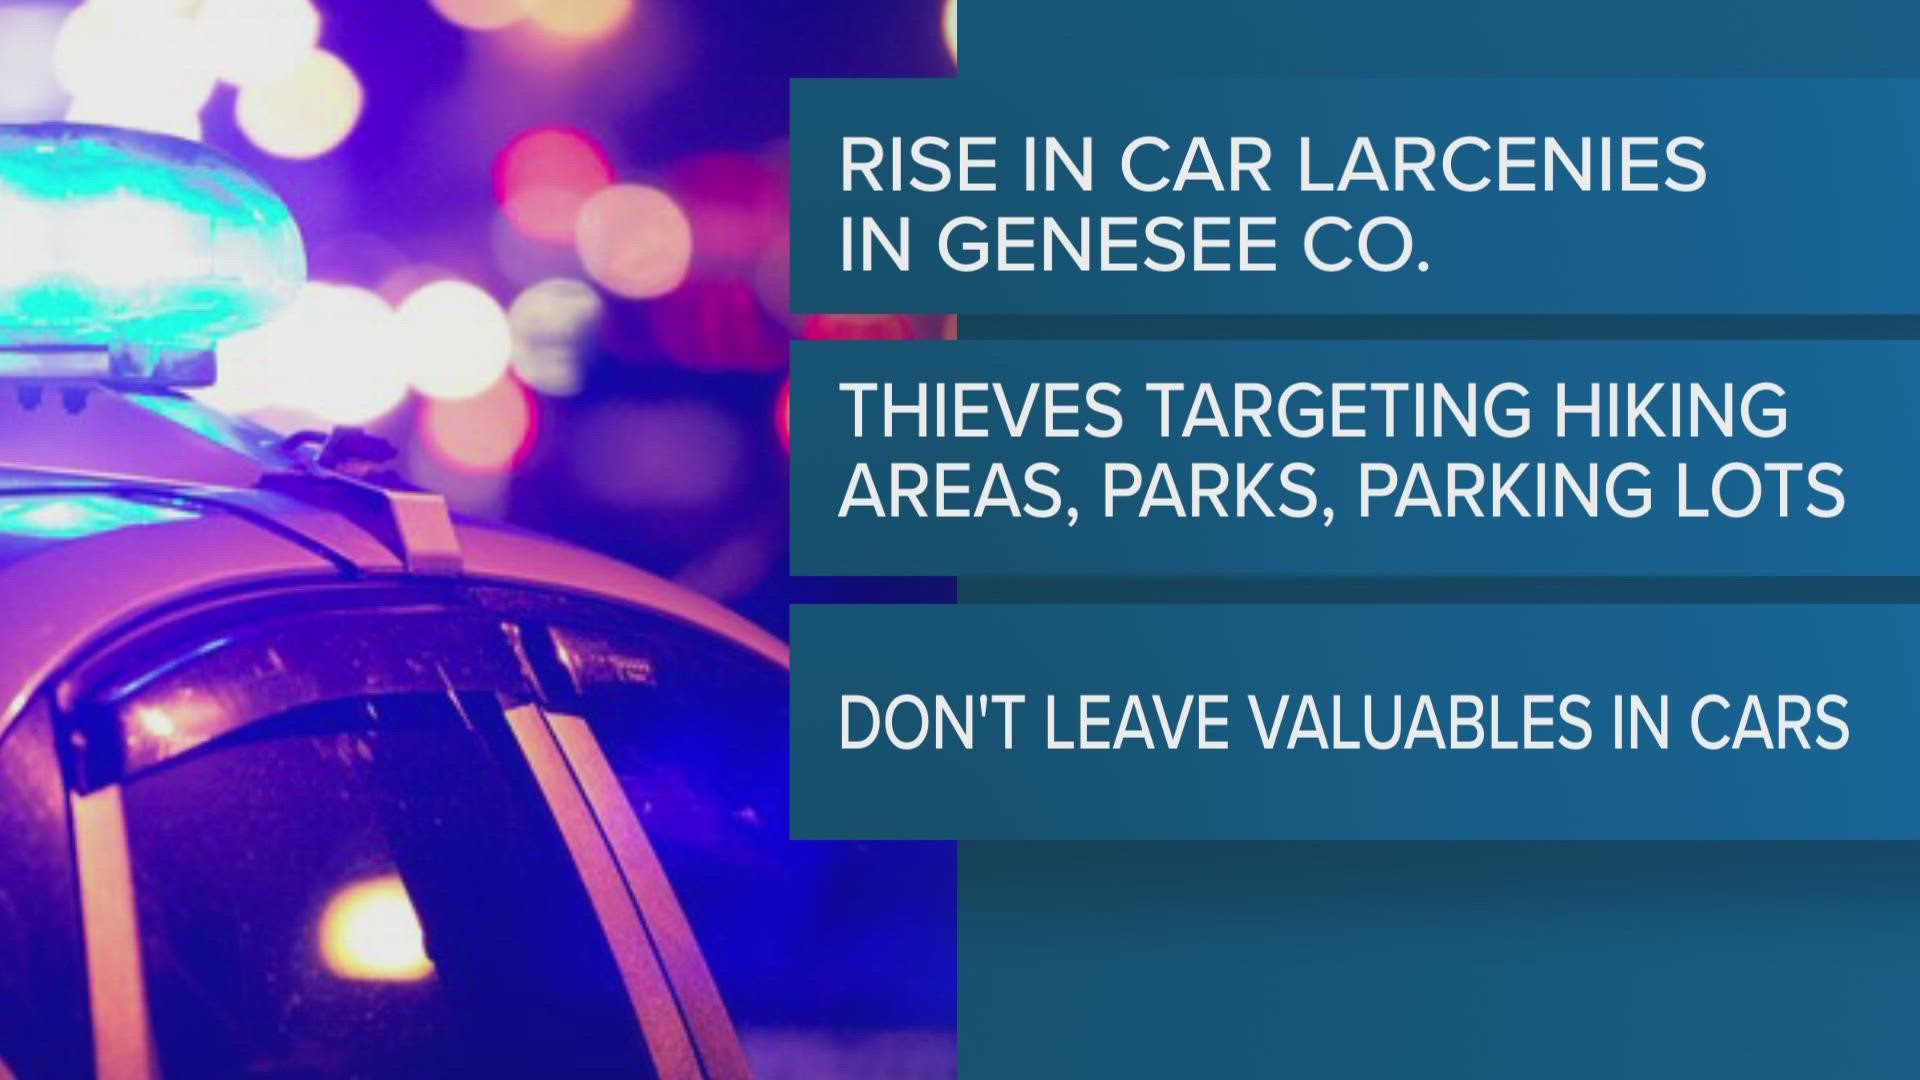 The county is seeing a rise in car break-ins... with cars parked at hiking areas, parks and parking lots.